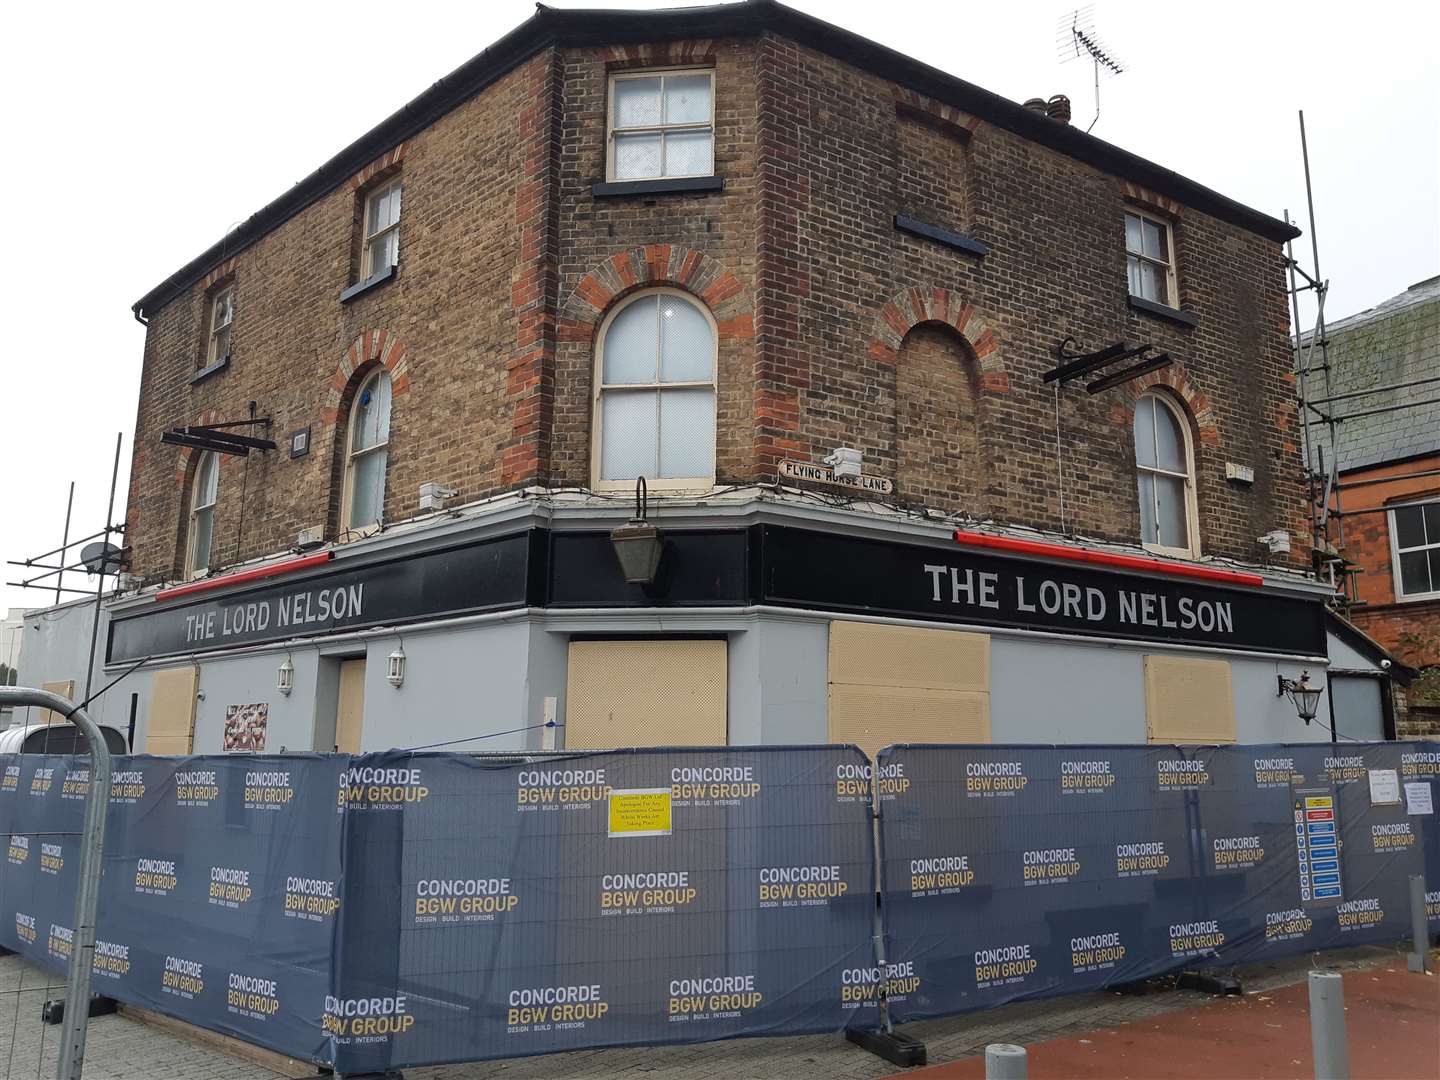 The Lord Nelson as it is now, prepared for revamp